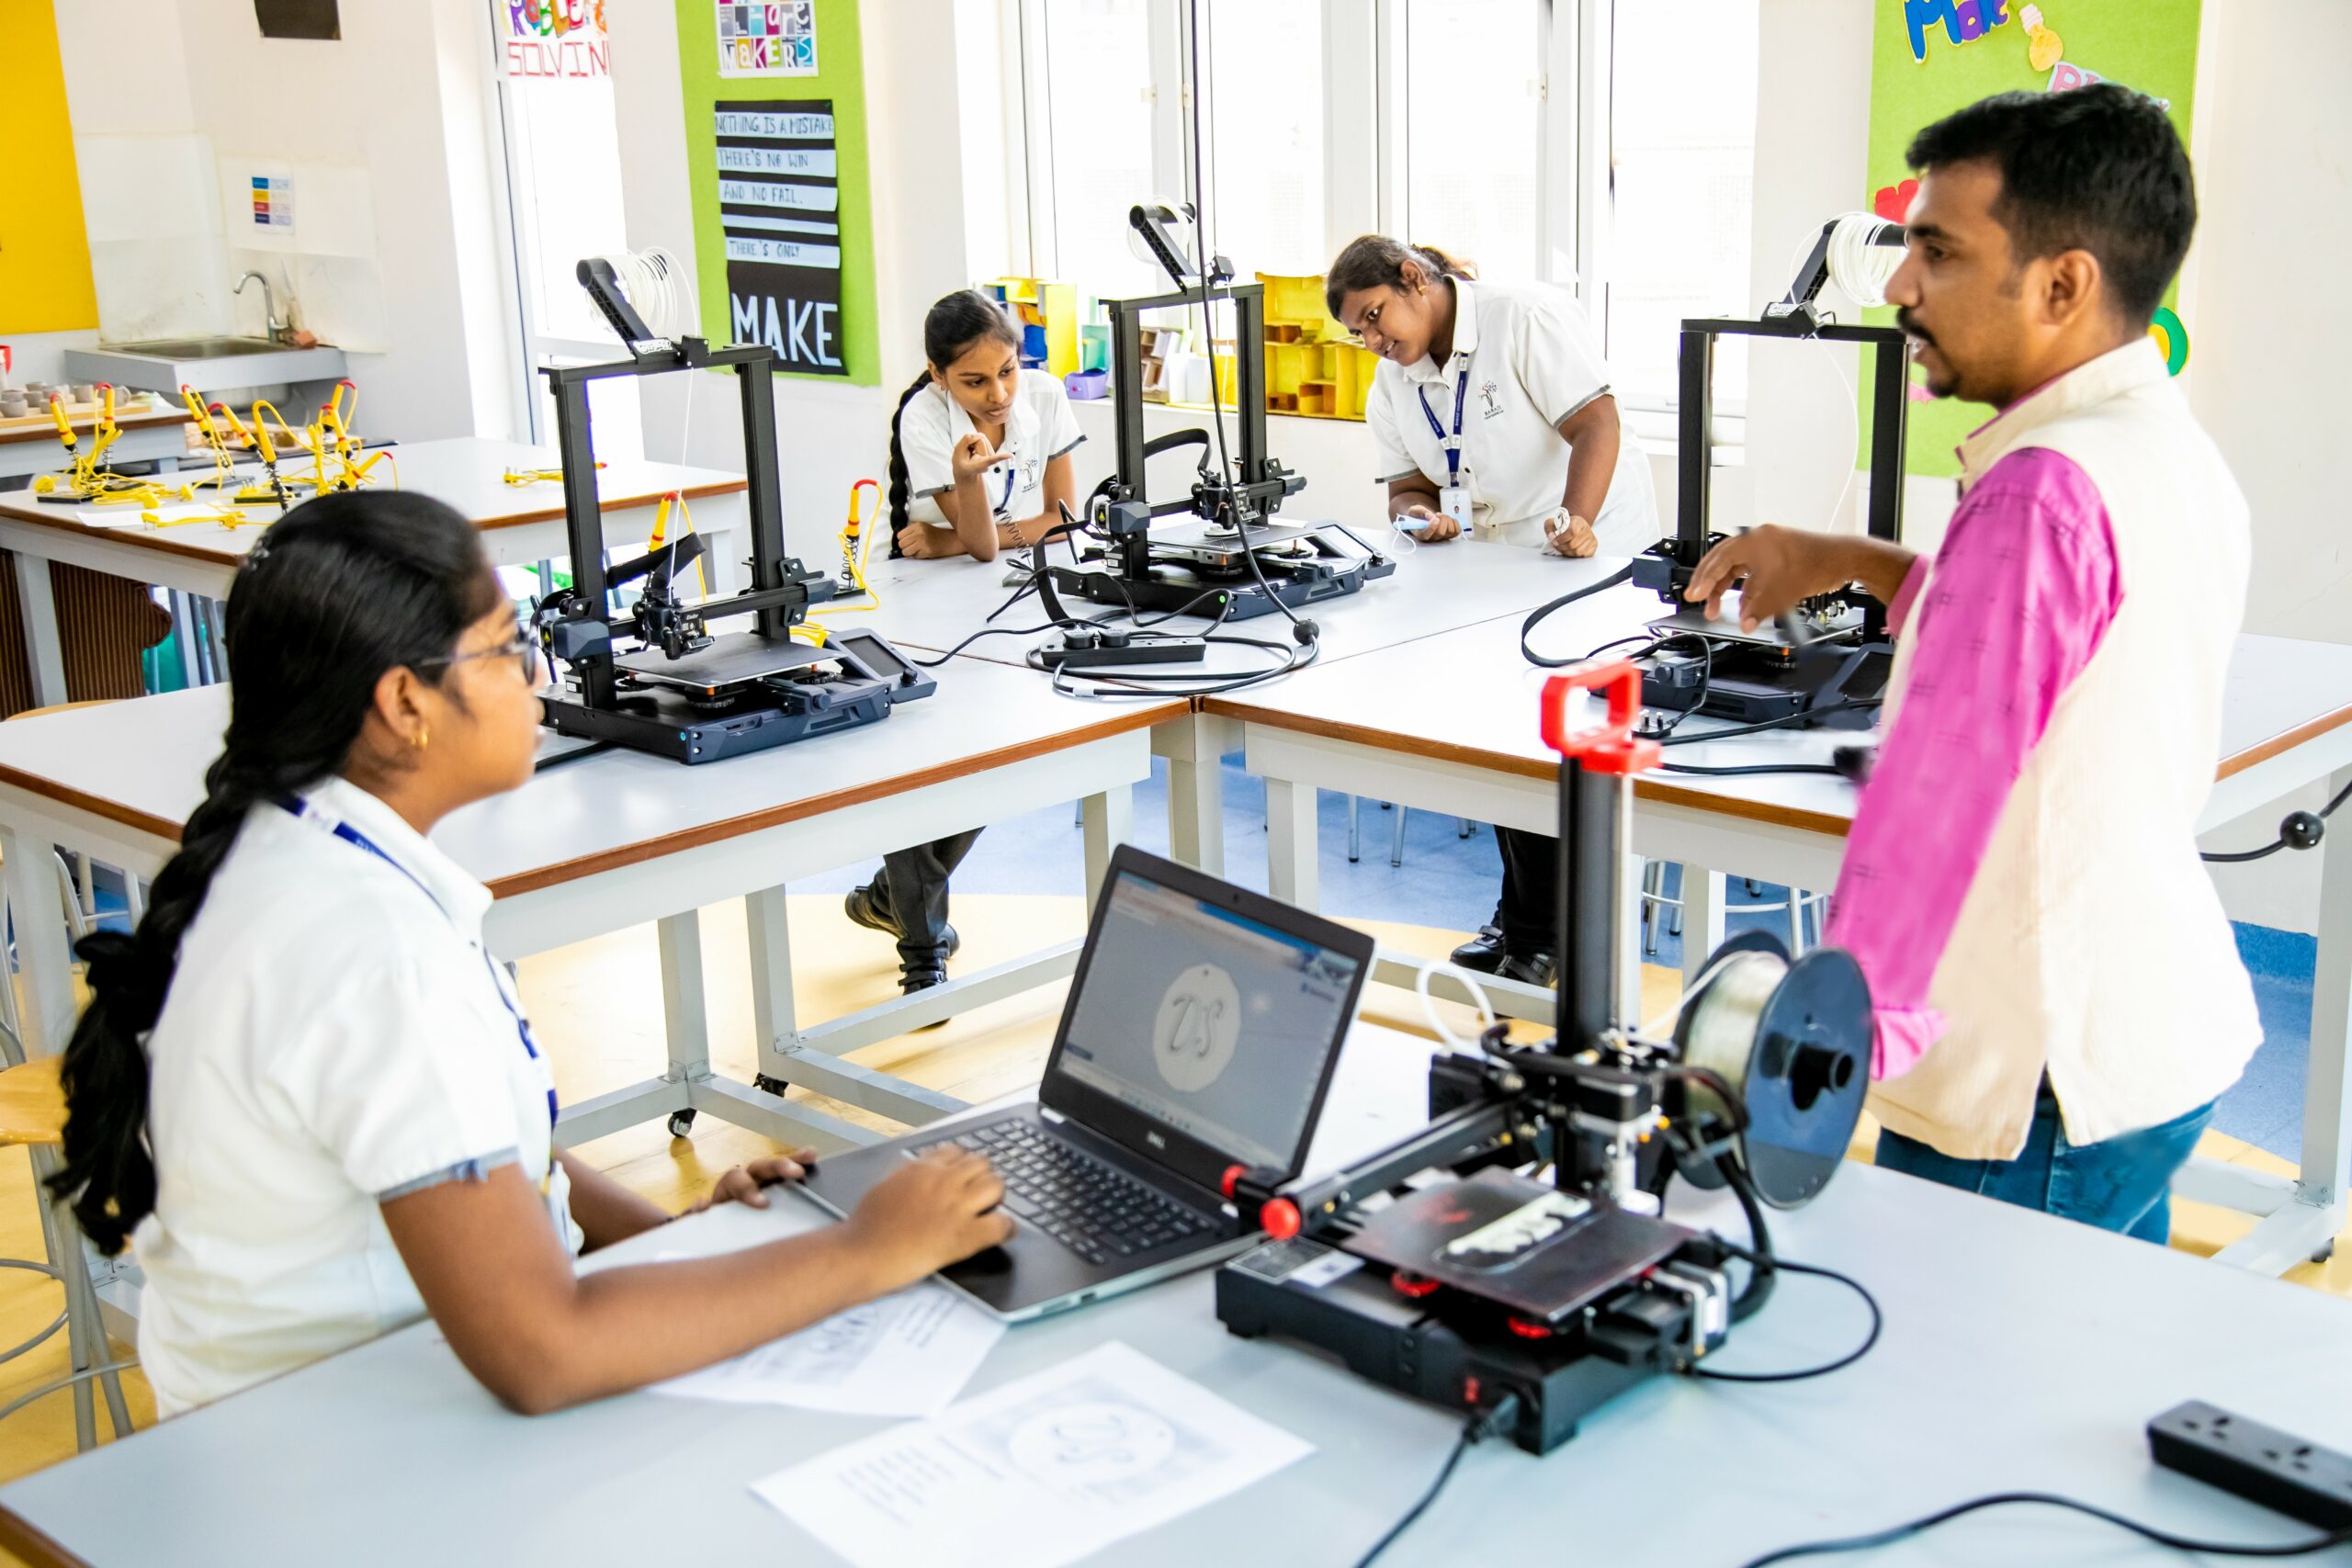 Three students are learning to work with 3D printing machine under the guidance of a senior teacher in a private school in Chennai.